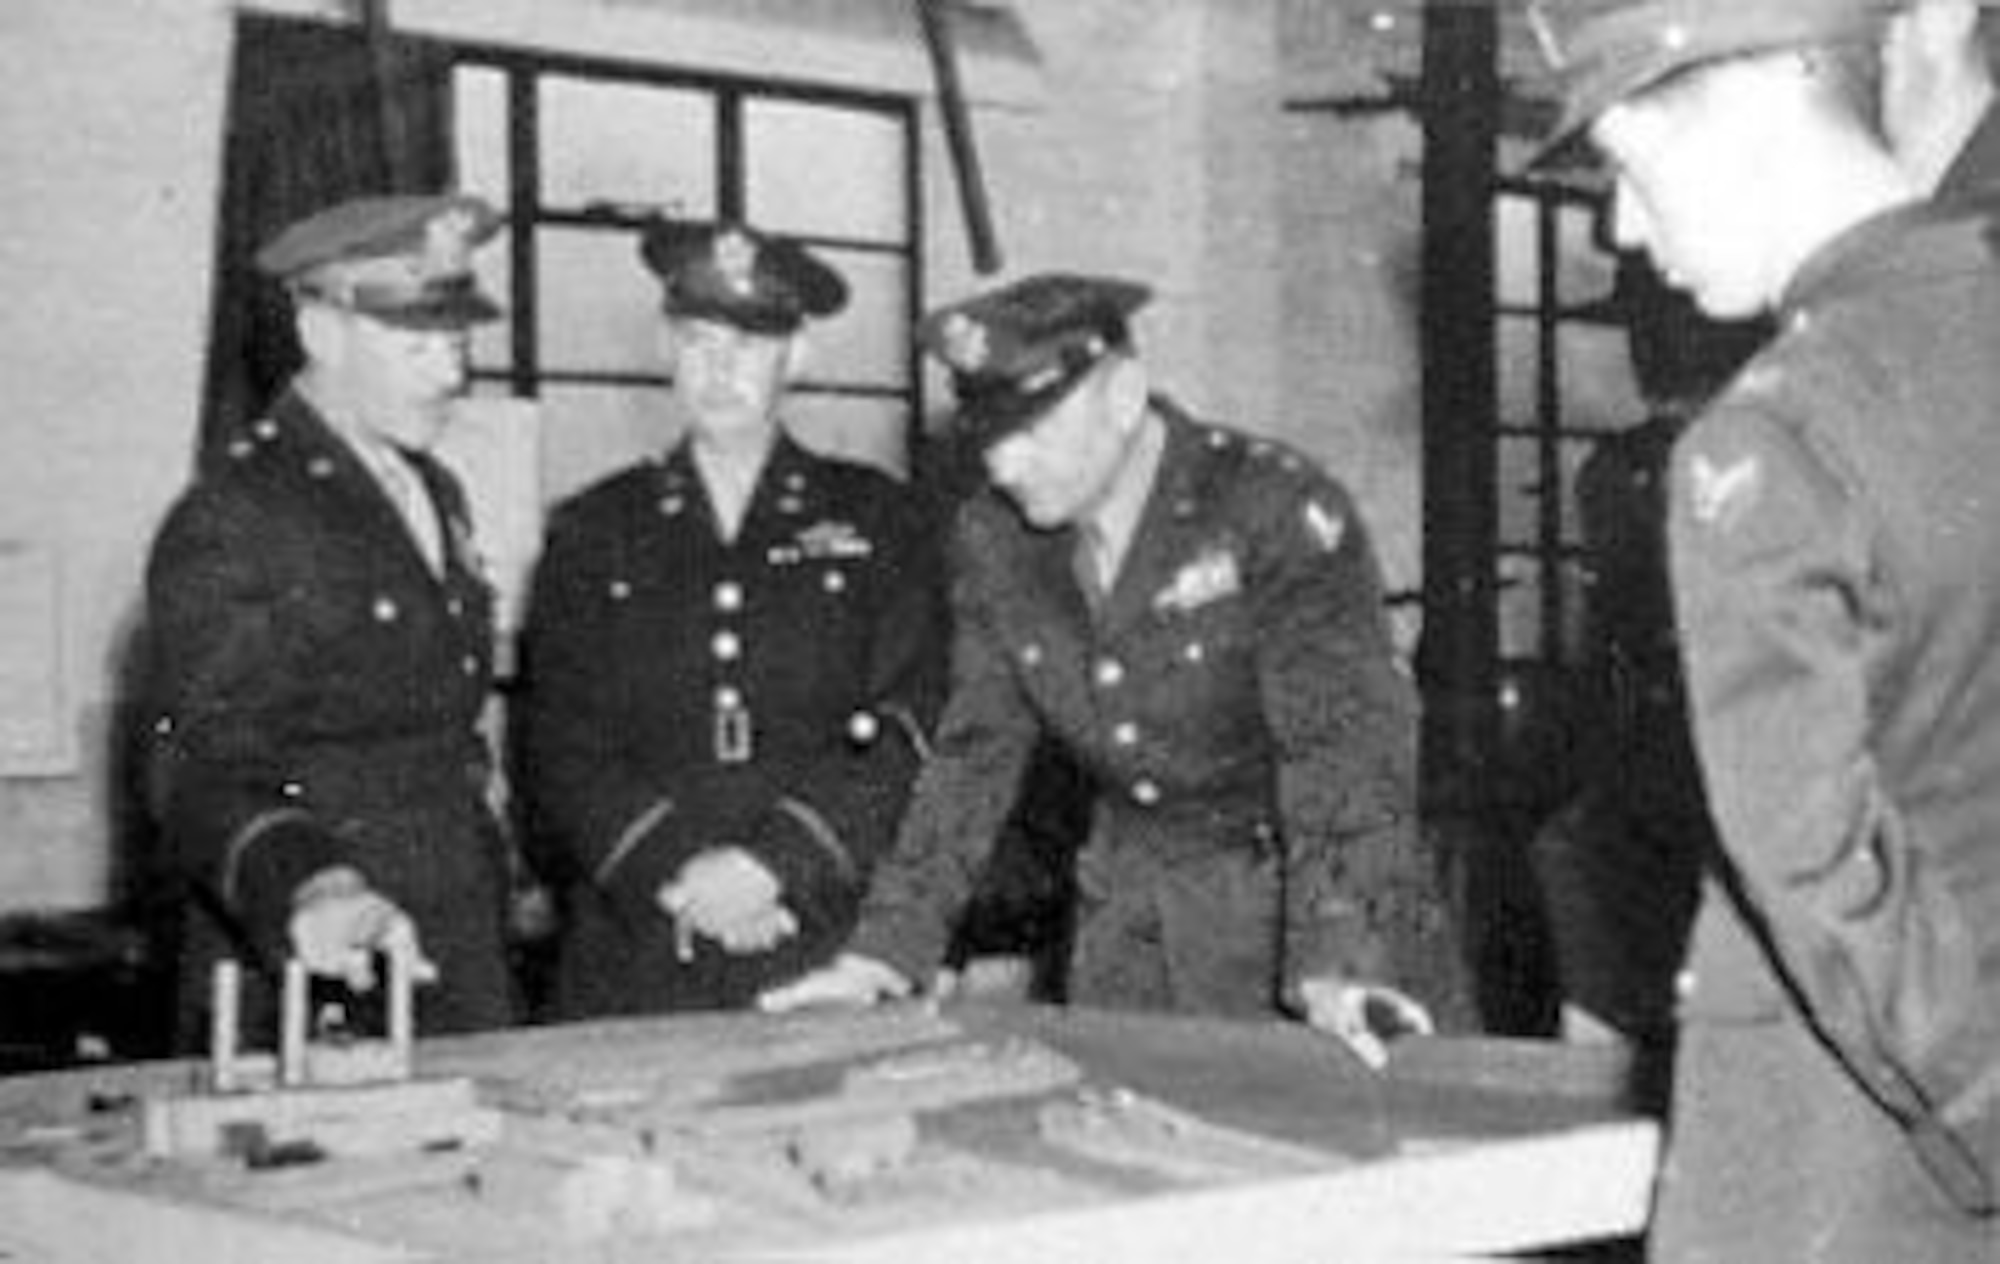 Maj. Gen. Francis S. Brady, Commanding Officer of the B-26 unit that lost all 10 planes on the May 17, 1943, mission, "explains" to Maj. Gen. Ira C. Eaker why none returned to England. They are looking at the same model of the target as the crews in the next photograph. (U.S. Air Force photo)